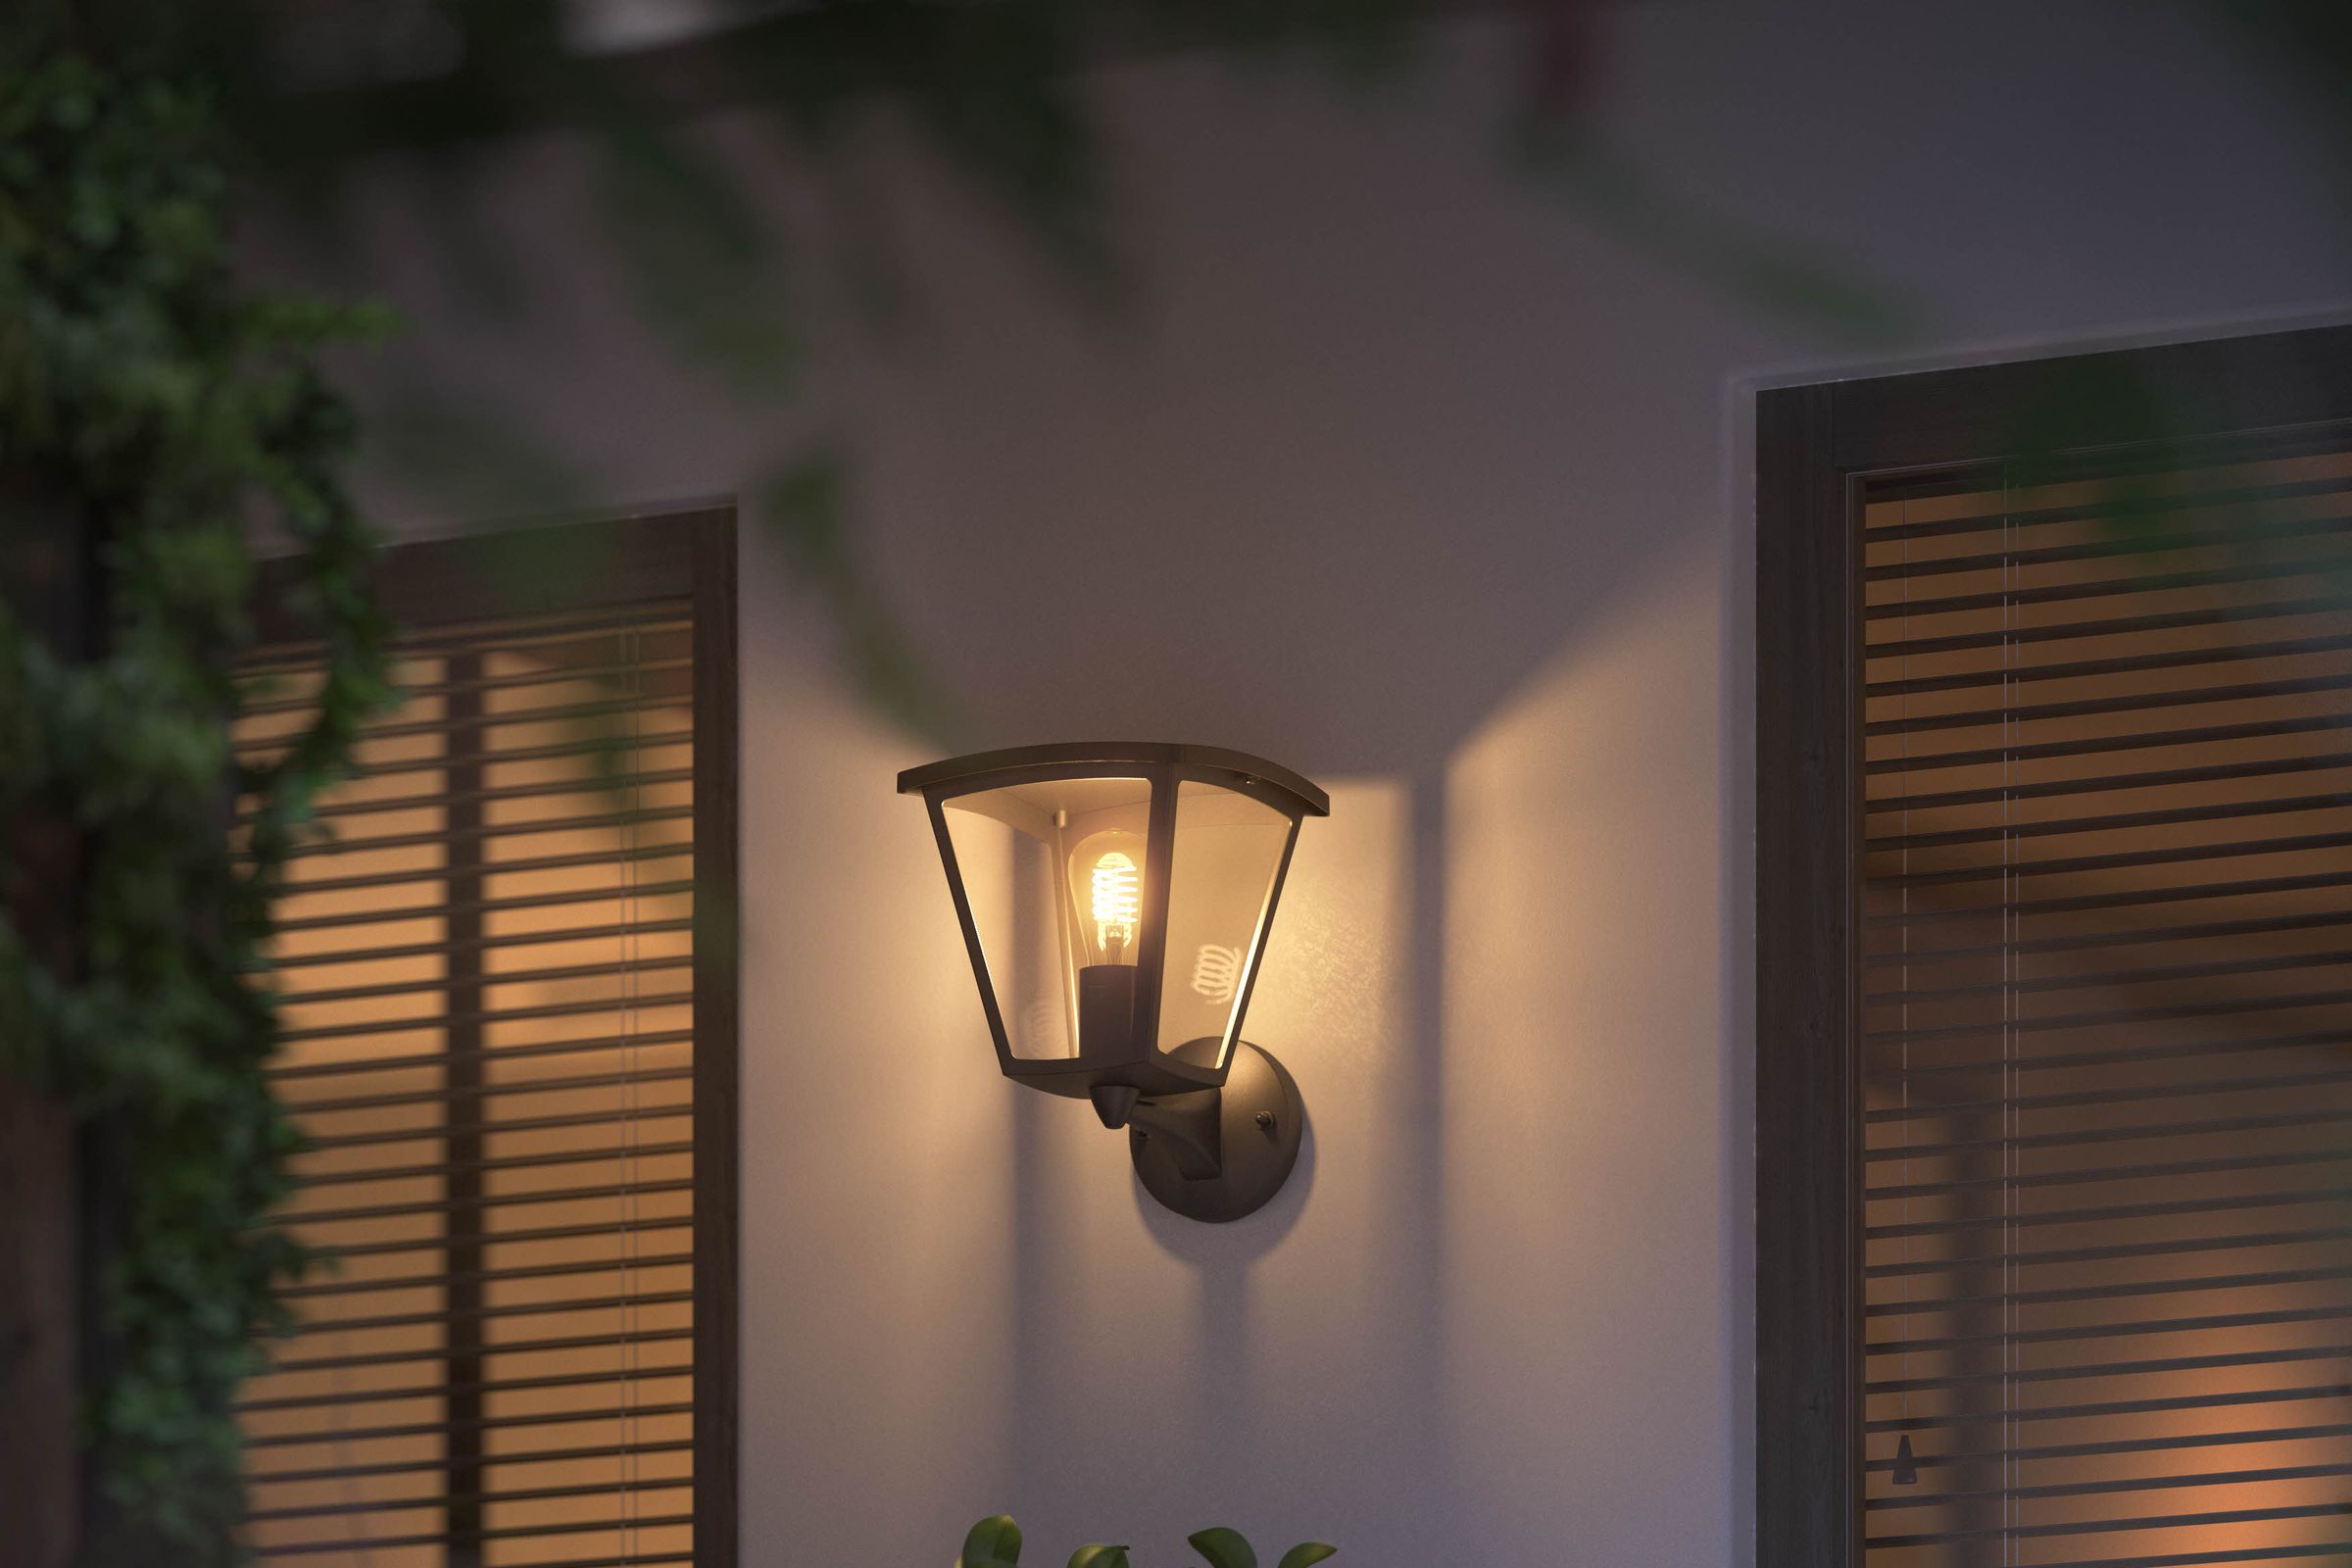 Philips Hue’s new smart outdoor light fixture the Inara harkens back to a less high-tech time.